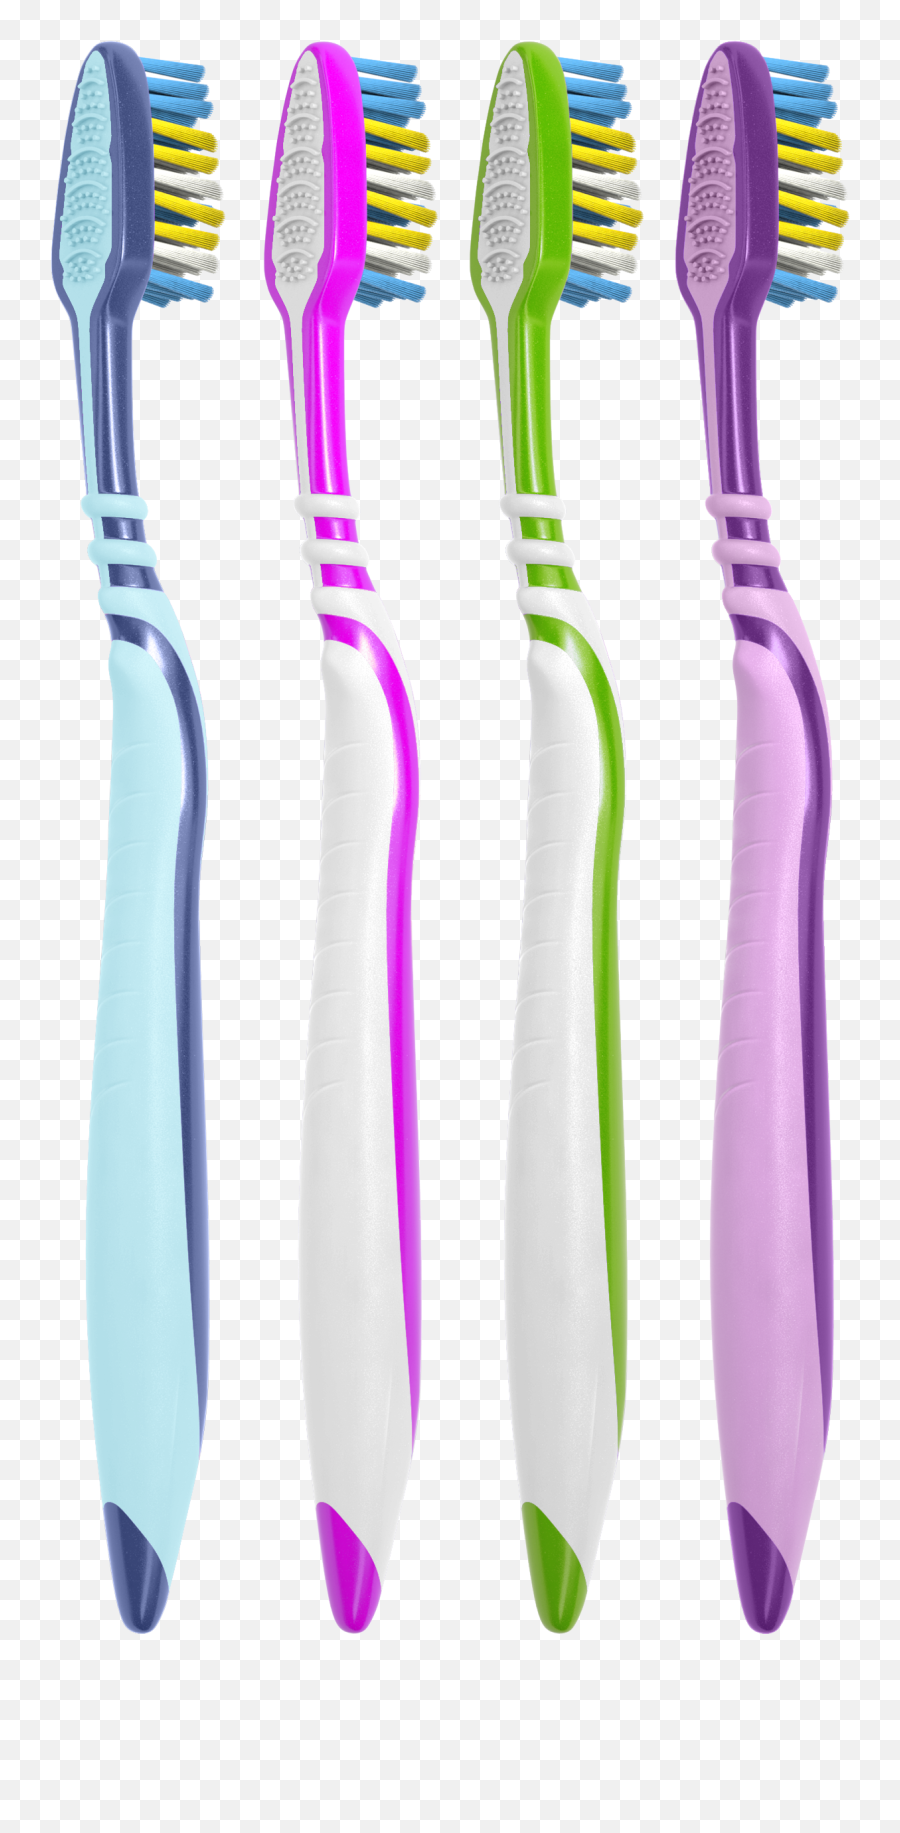 Colgate Zigzag Deep Clean Manual Toothbrush With Tongue And Emoji,Is There An Emoji For Tongue In Cheek